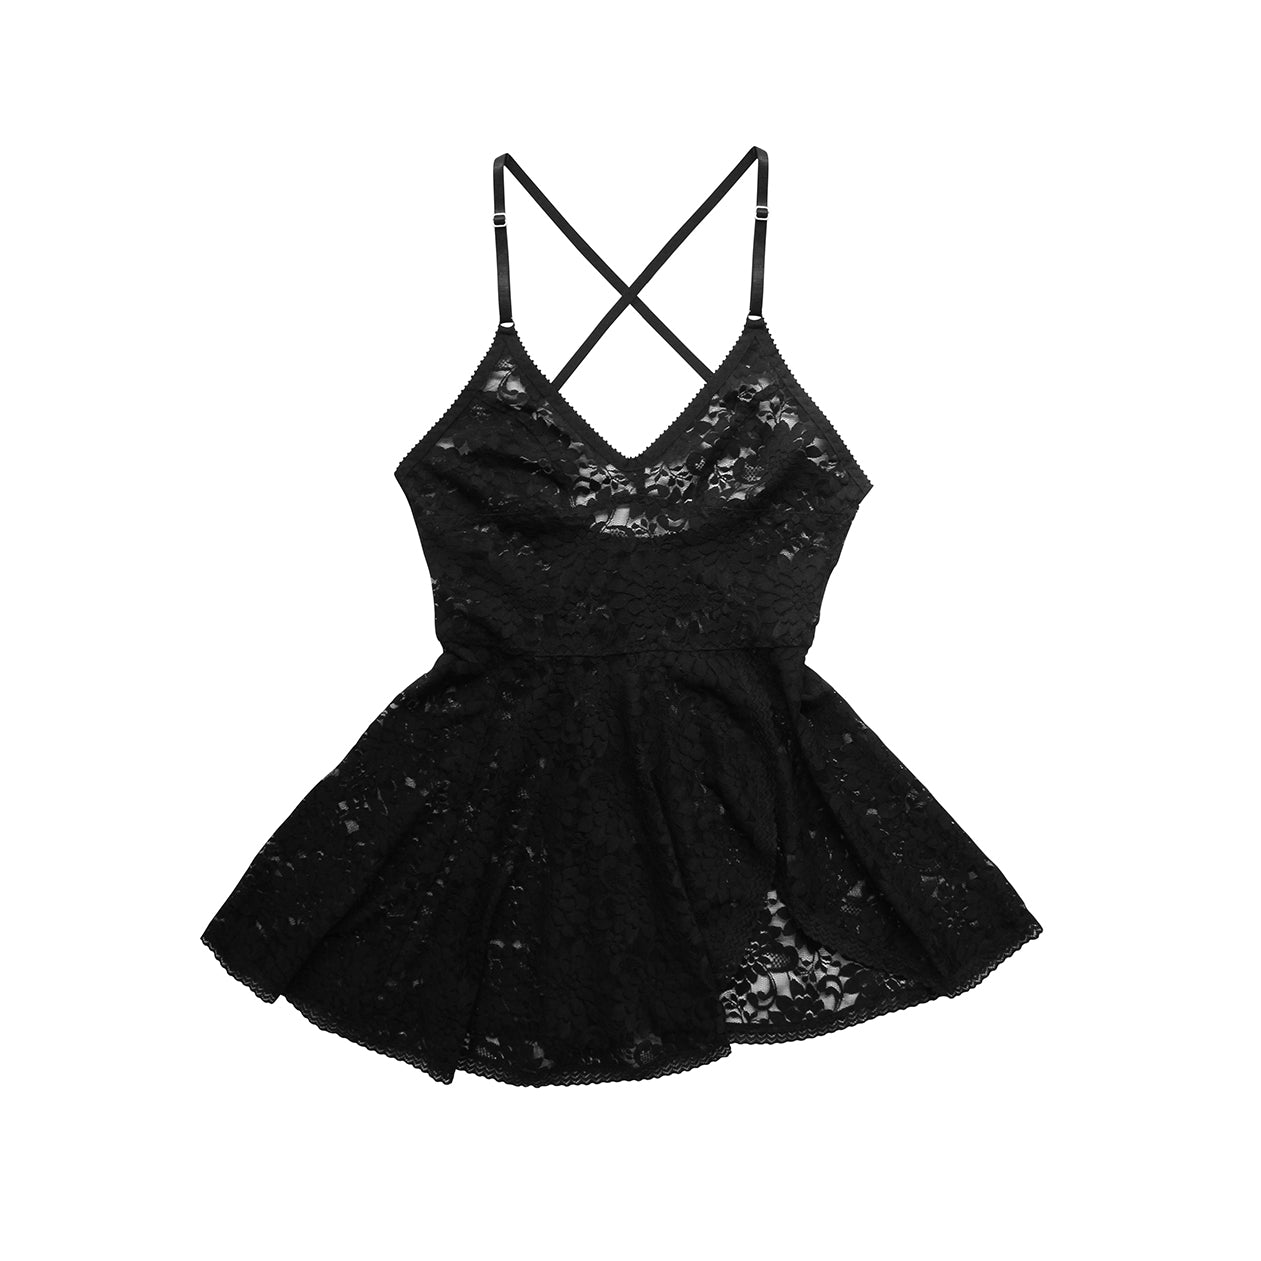 Black Lace Nightie | Plus Size Lingerie Made in Australia by Hopeless ...